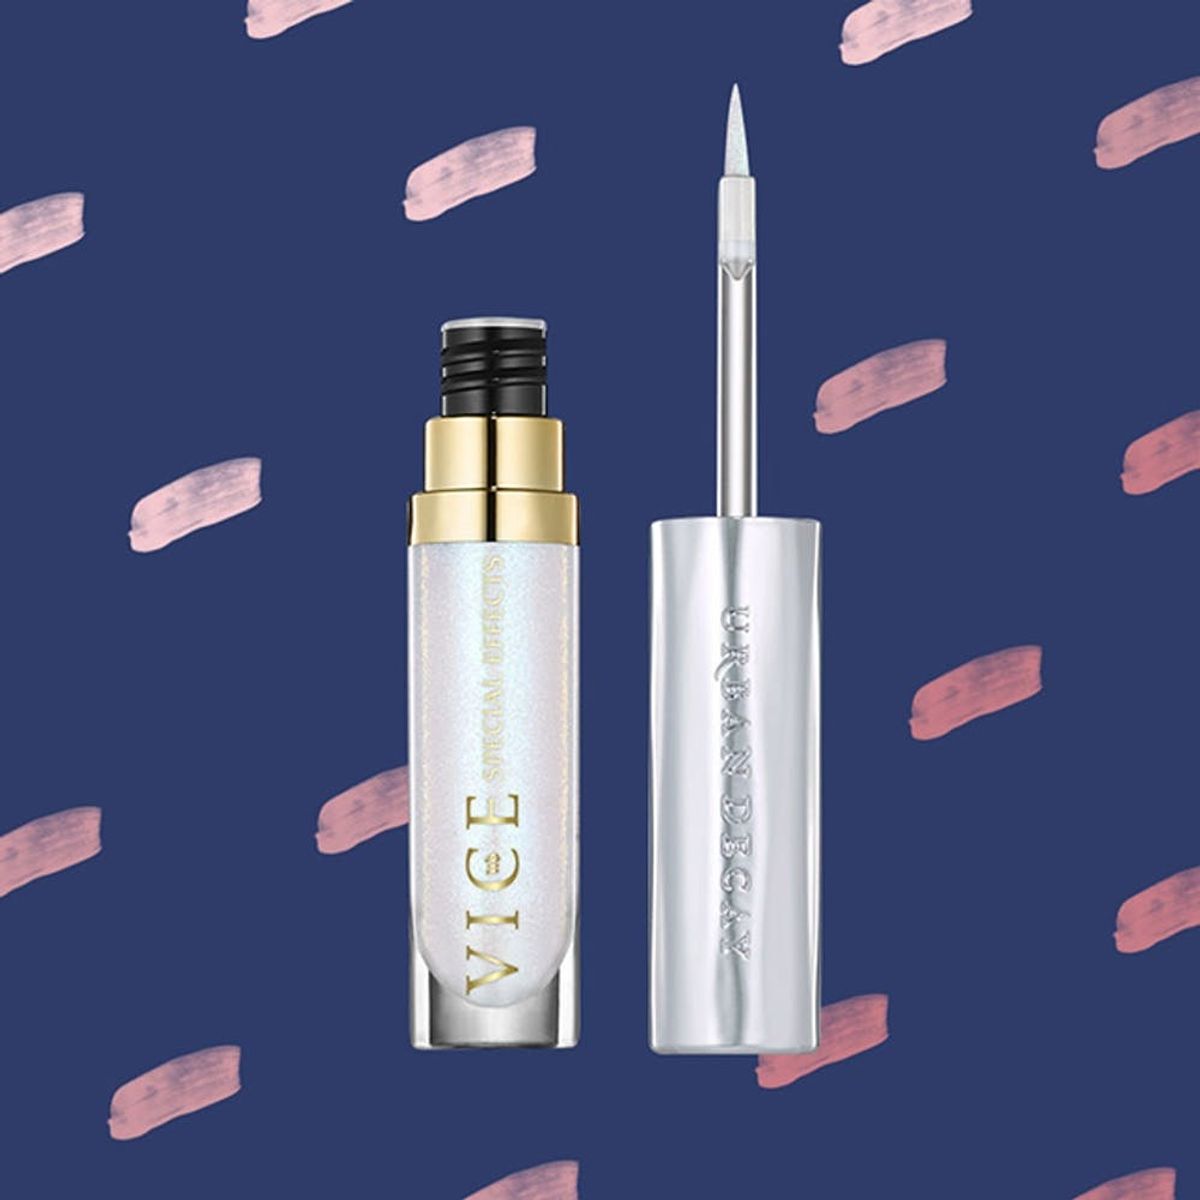 This Waterproof Holographic Topcoat Upgrades Every Lipstick I Own